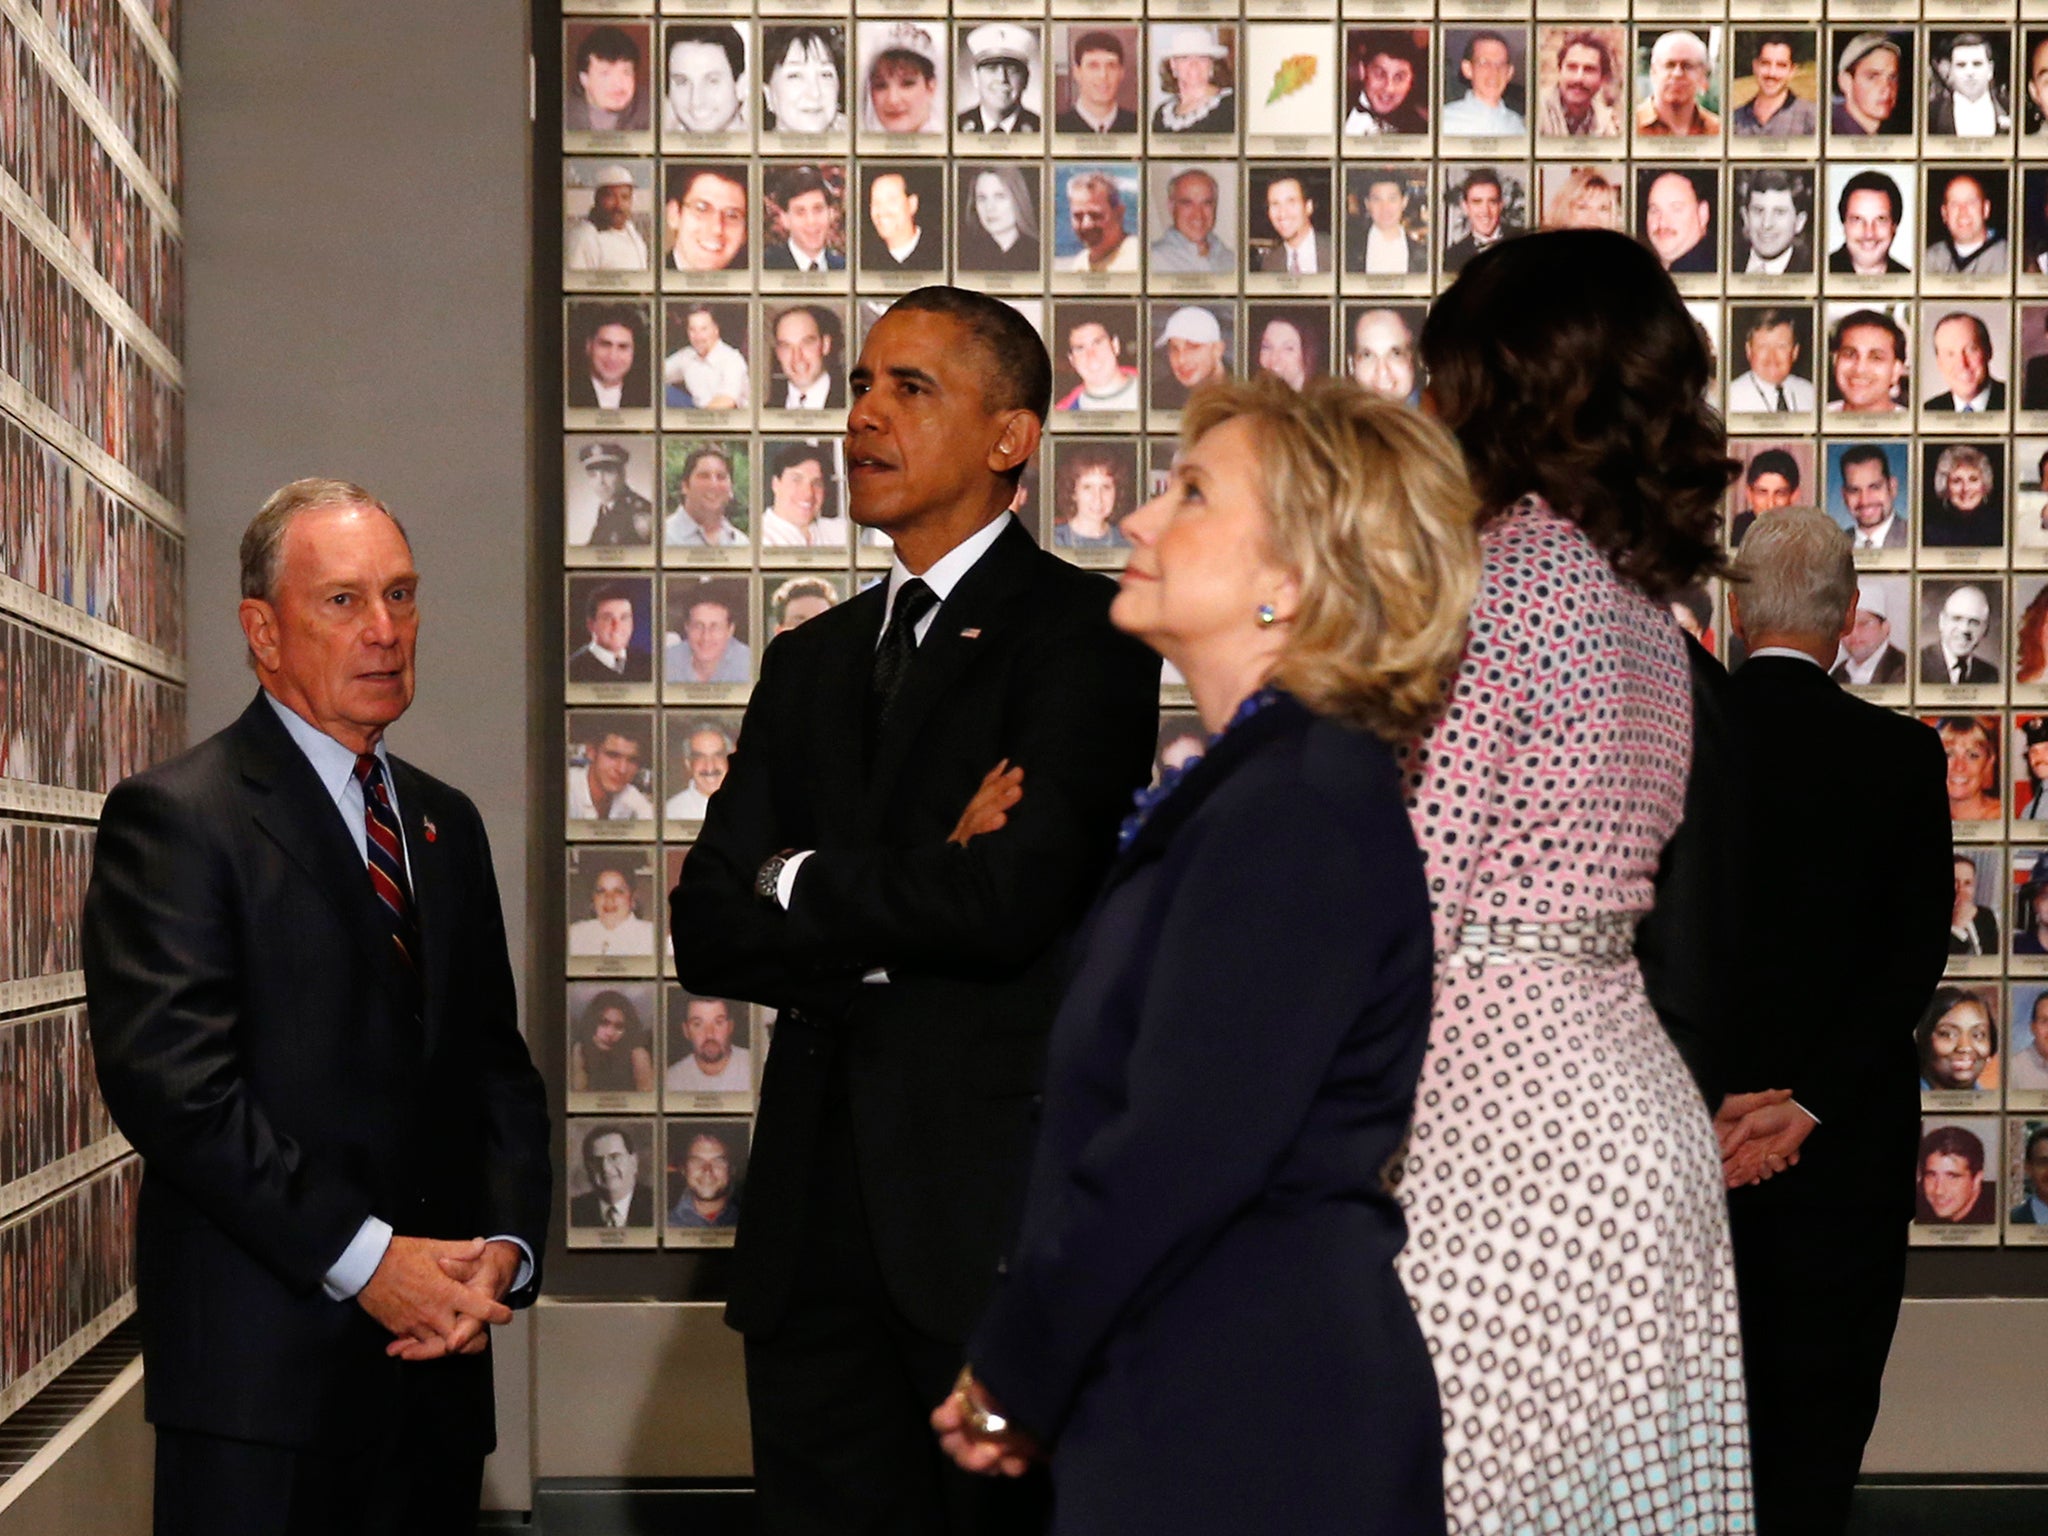 US President Barack Obama and former New York Mayor Michael Bloomberg look at the faces of those who died during the 9/11 attacks at the National September 11 Memorial Museum in New York